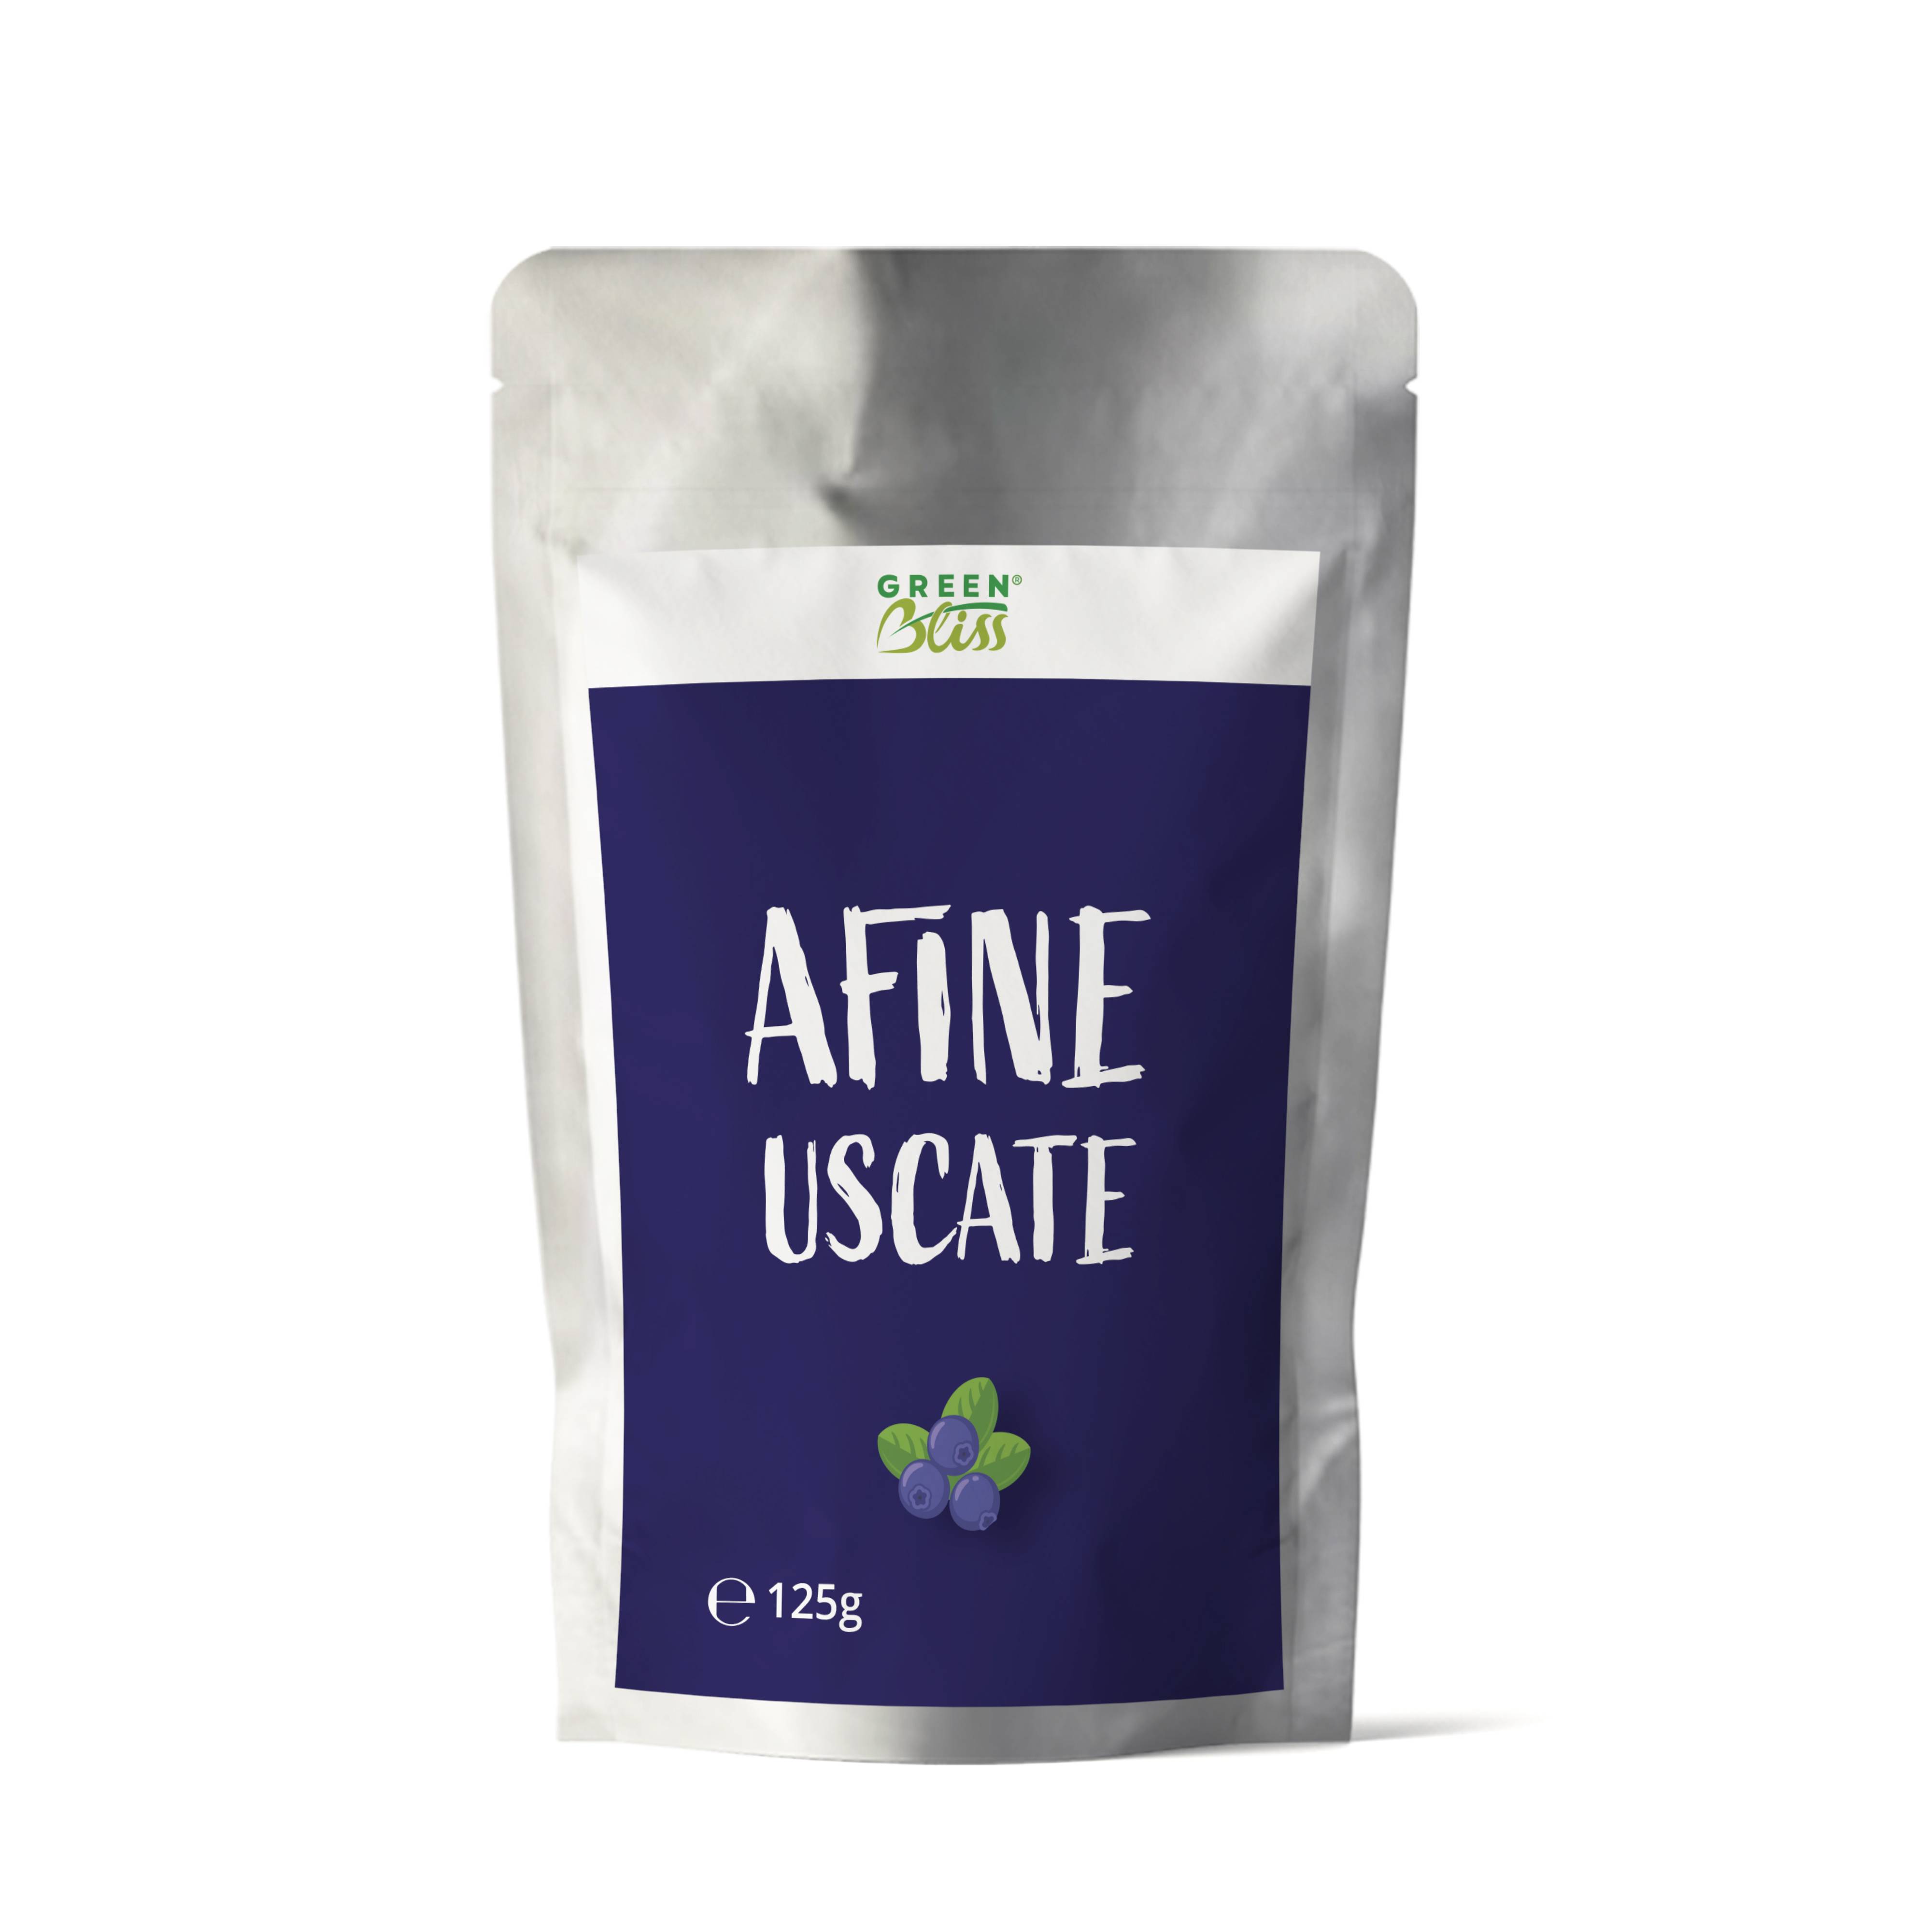 Afine uscate, 125 g, Green Bliss